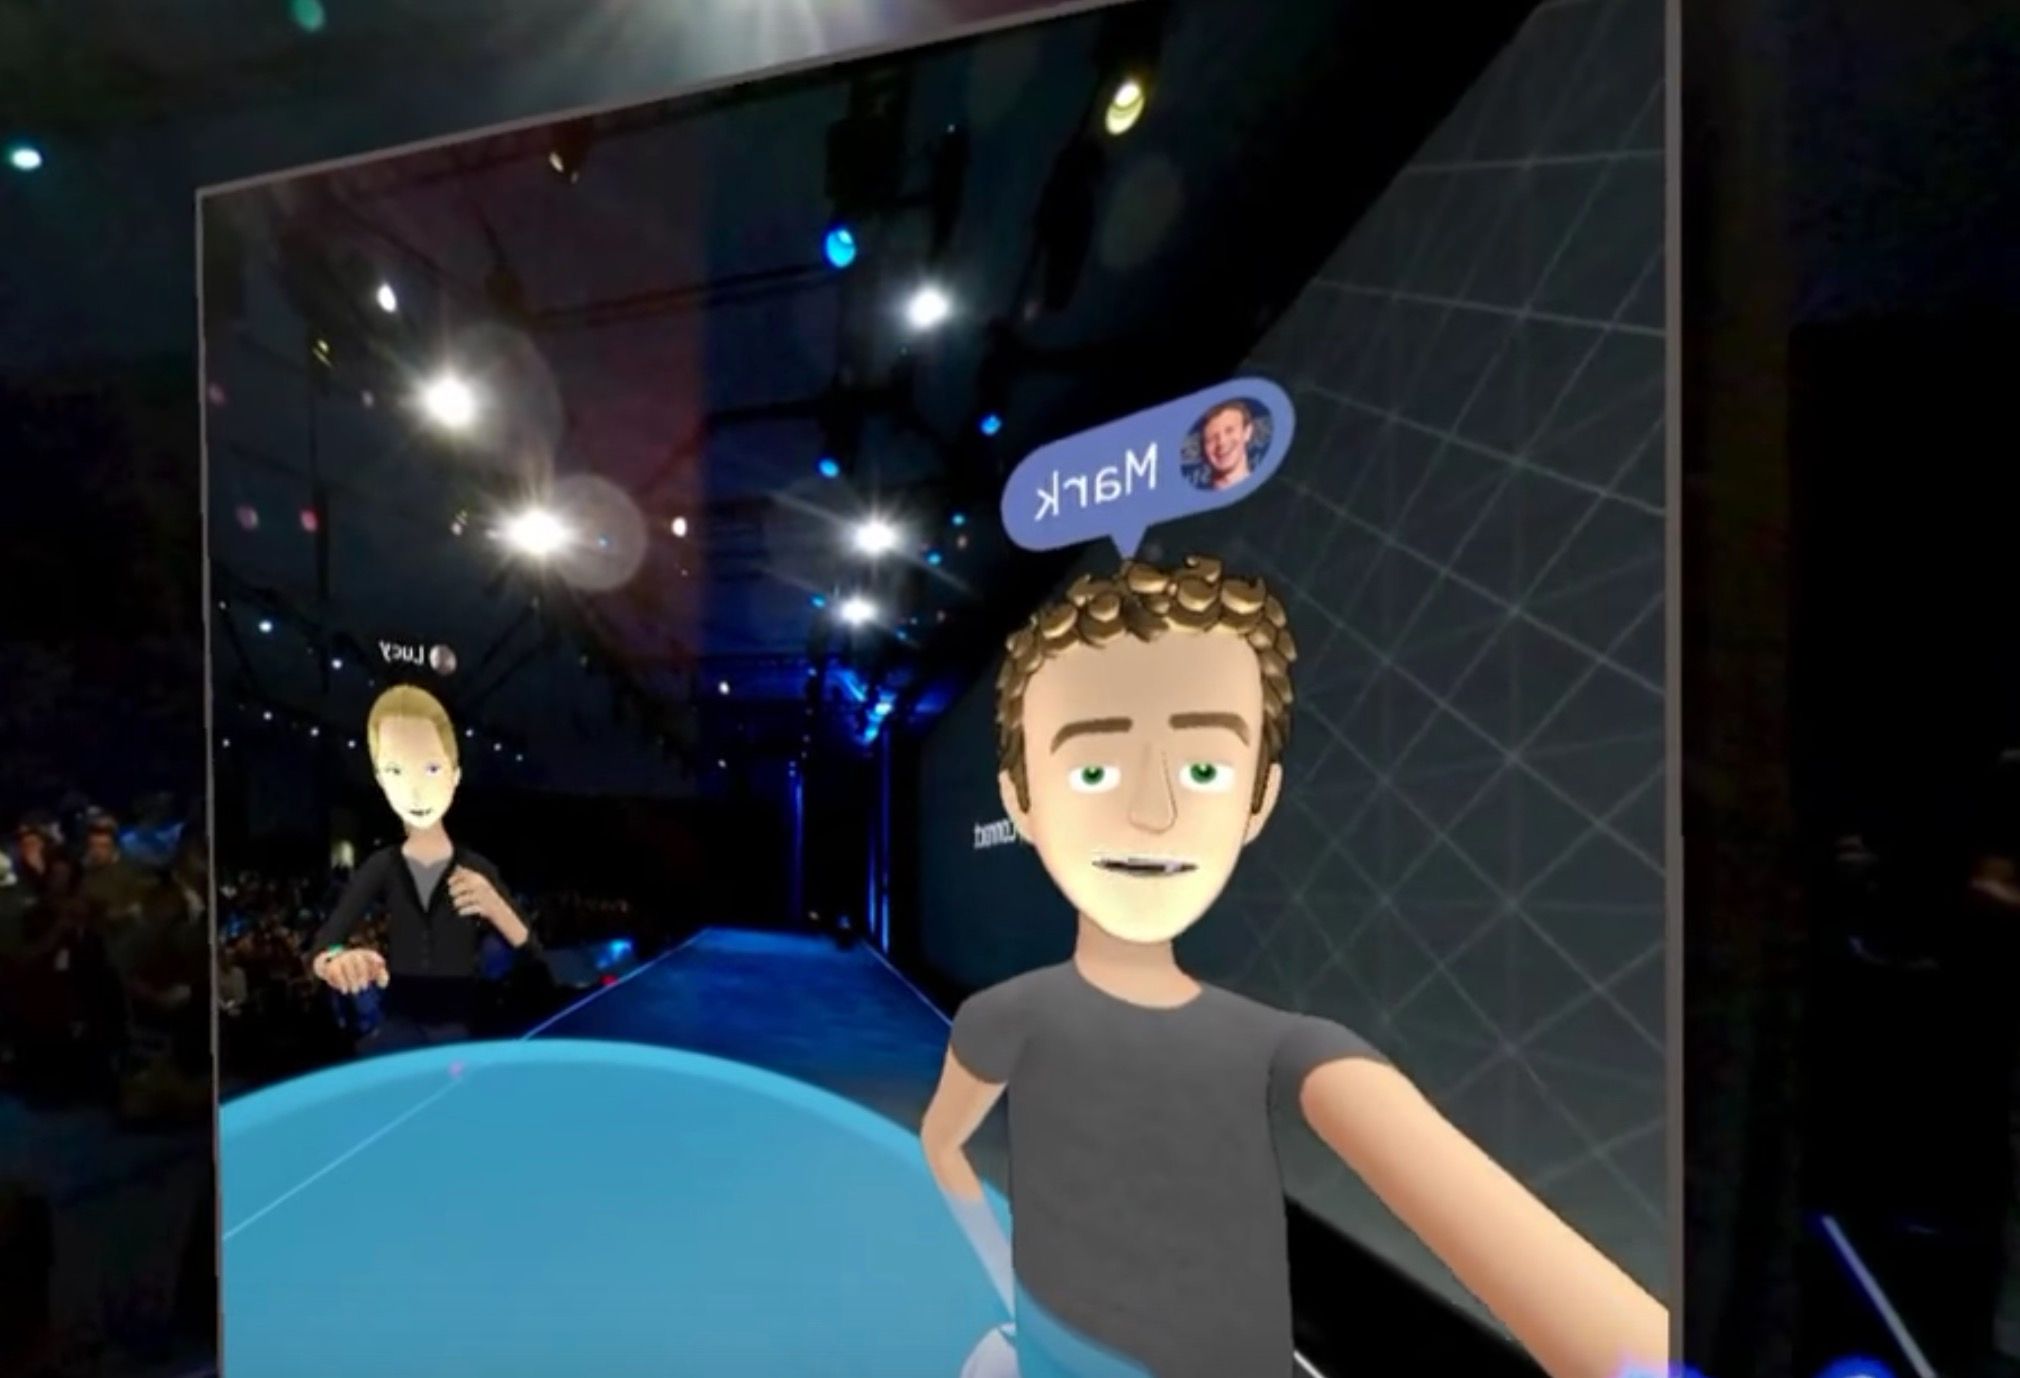 oculus rooms and parties explained how does facebook see us being social in vr image 2